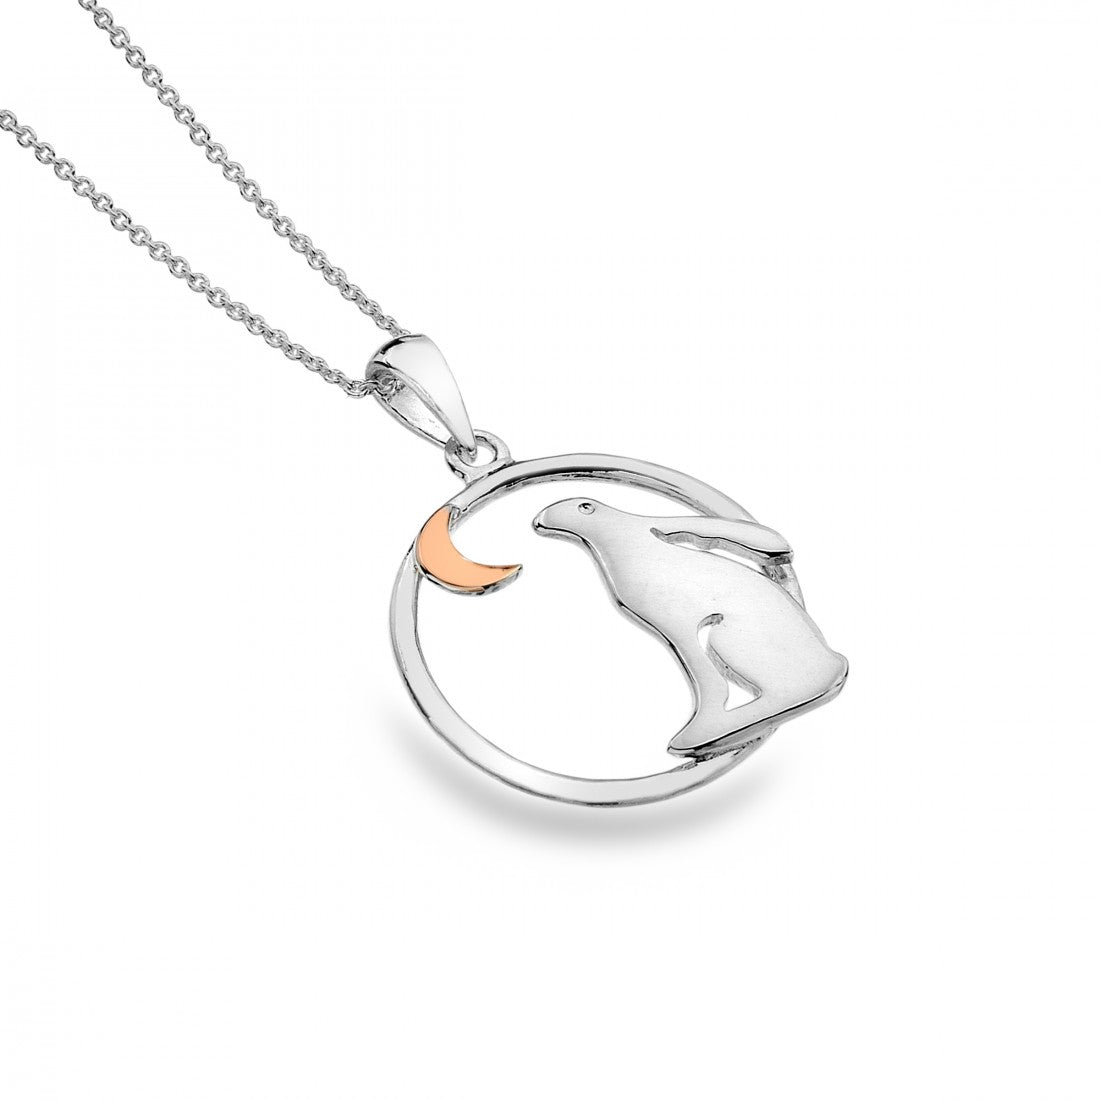 Hare And Moon Necklace - The Nancy Smillie Shop - Art, Jewellery & Designer Gifts Glasgow